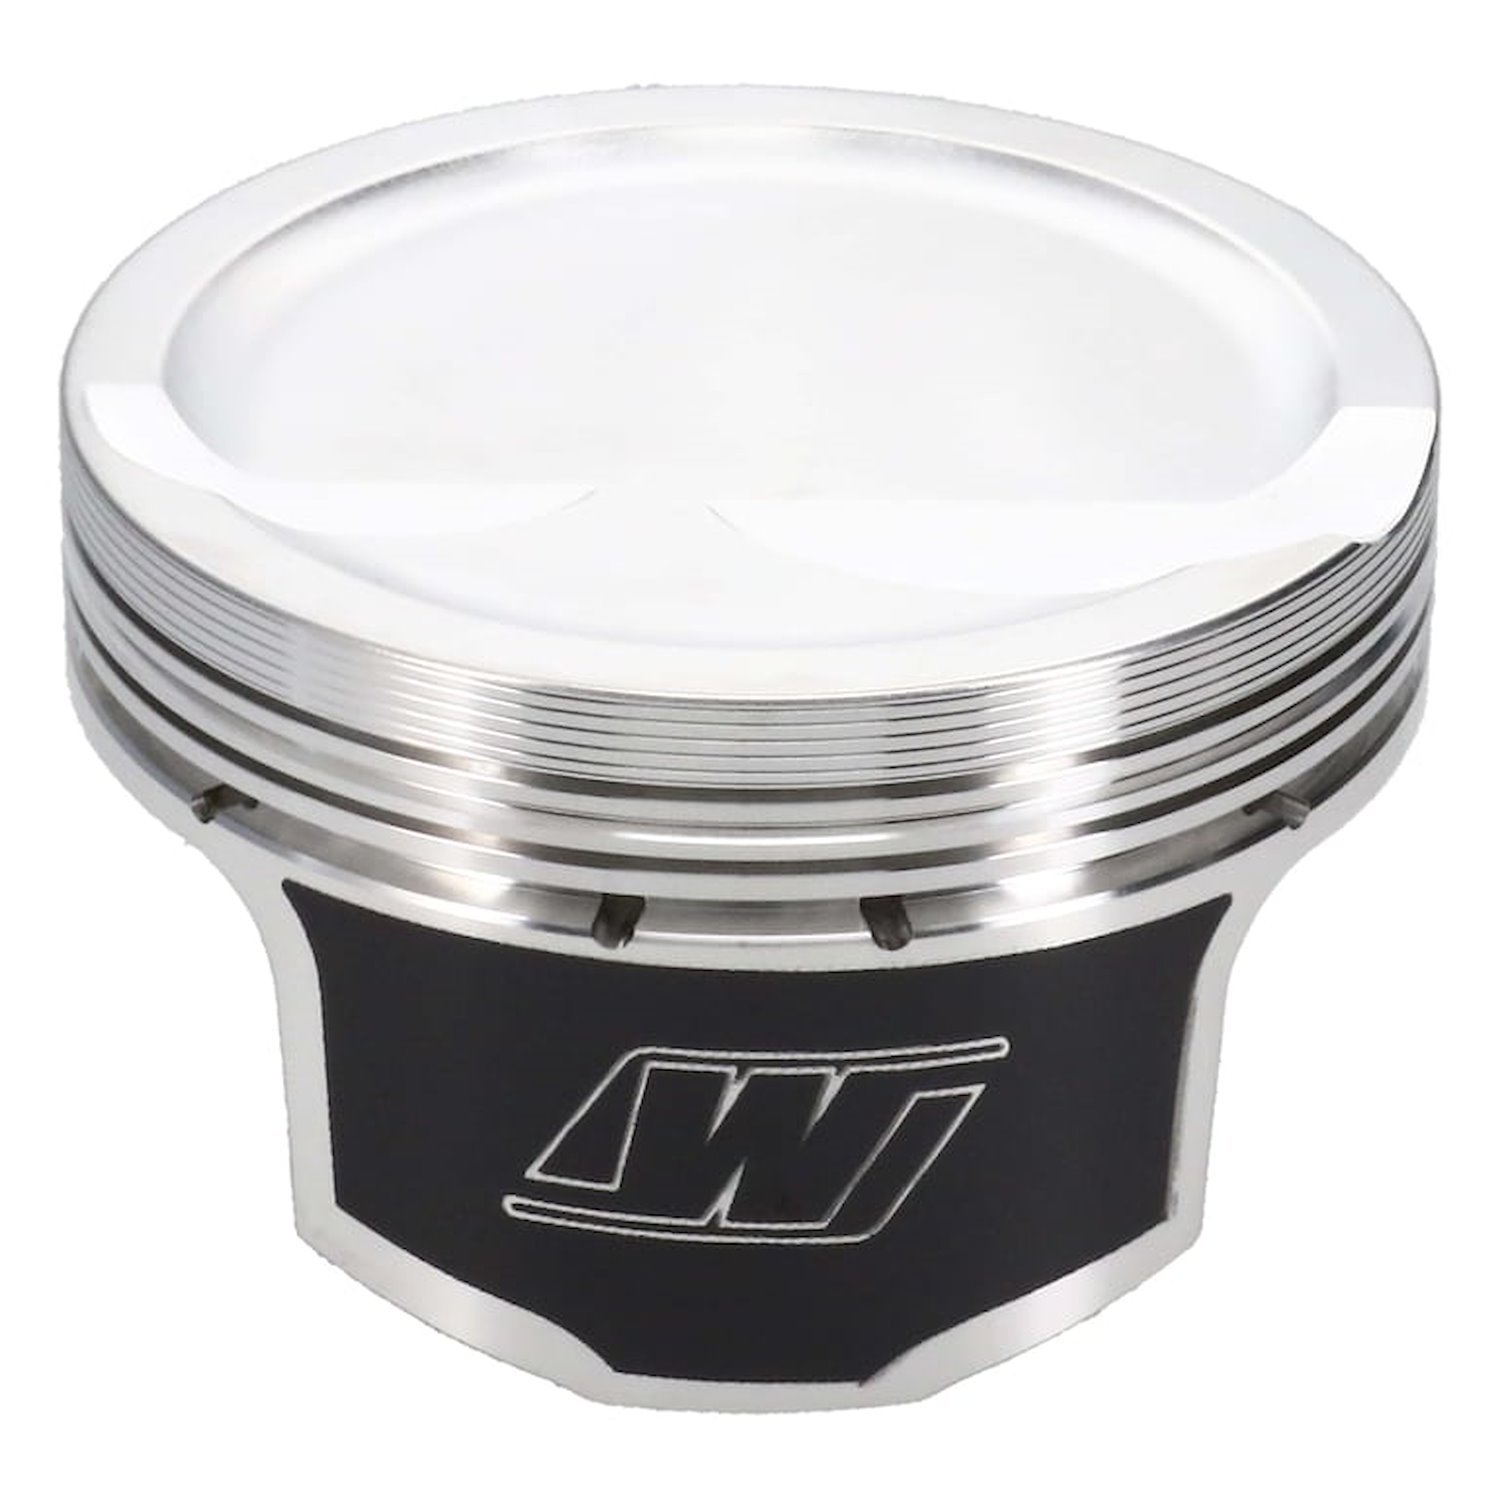 RED0081X185 RED-Series Piston Set, Chevy LS, 4.185 in. Bore, -15 cc Dish